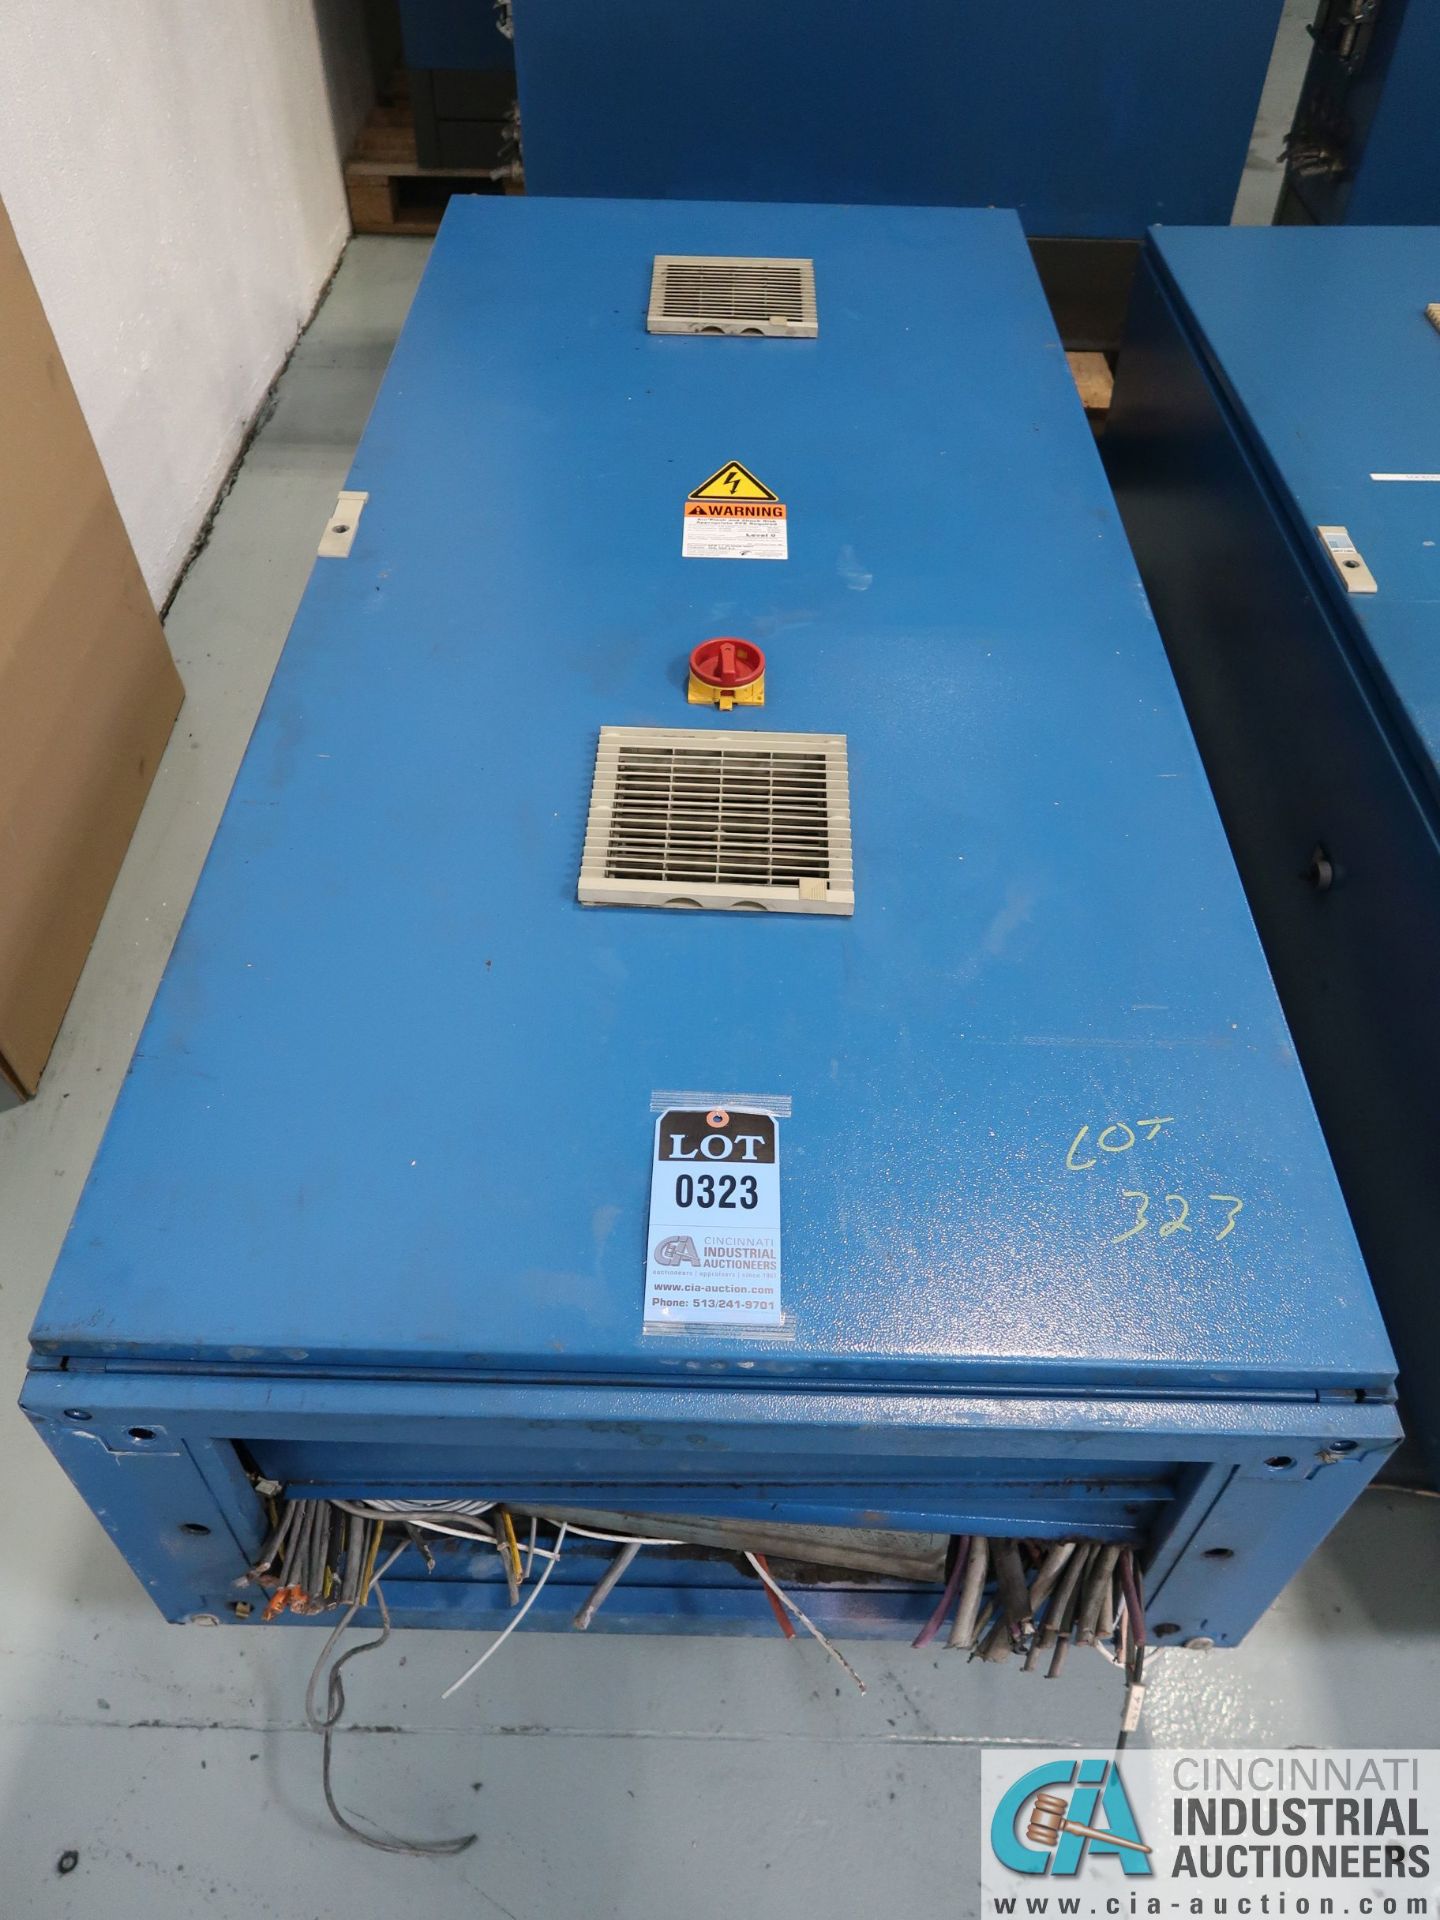 RITTAL SINGLE-DOOR ELECTRICAL MACHINE CONTROL CABINET WITH ELECTRICAL COMPONENTS; 16" X 32" X 72"